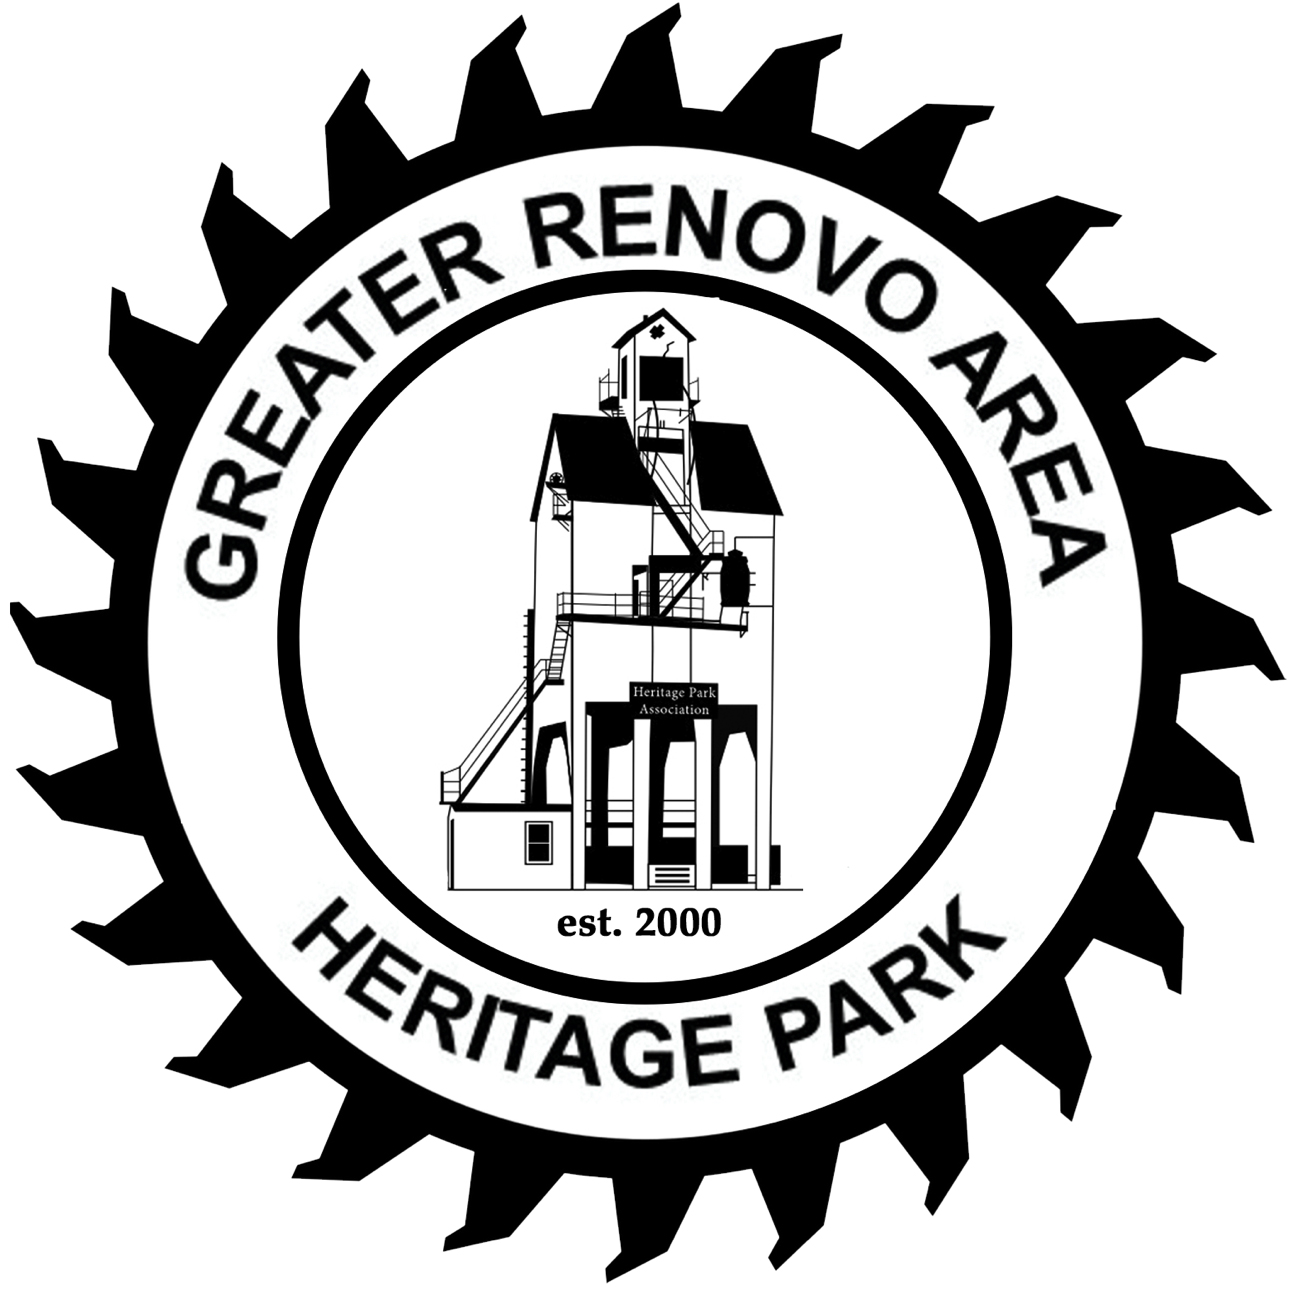 The Greater Renovo Area Heritage Park | Charles E Stimpson | The Greater Renovo Area Heritage Park